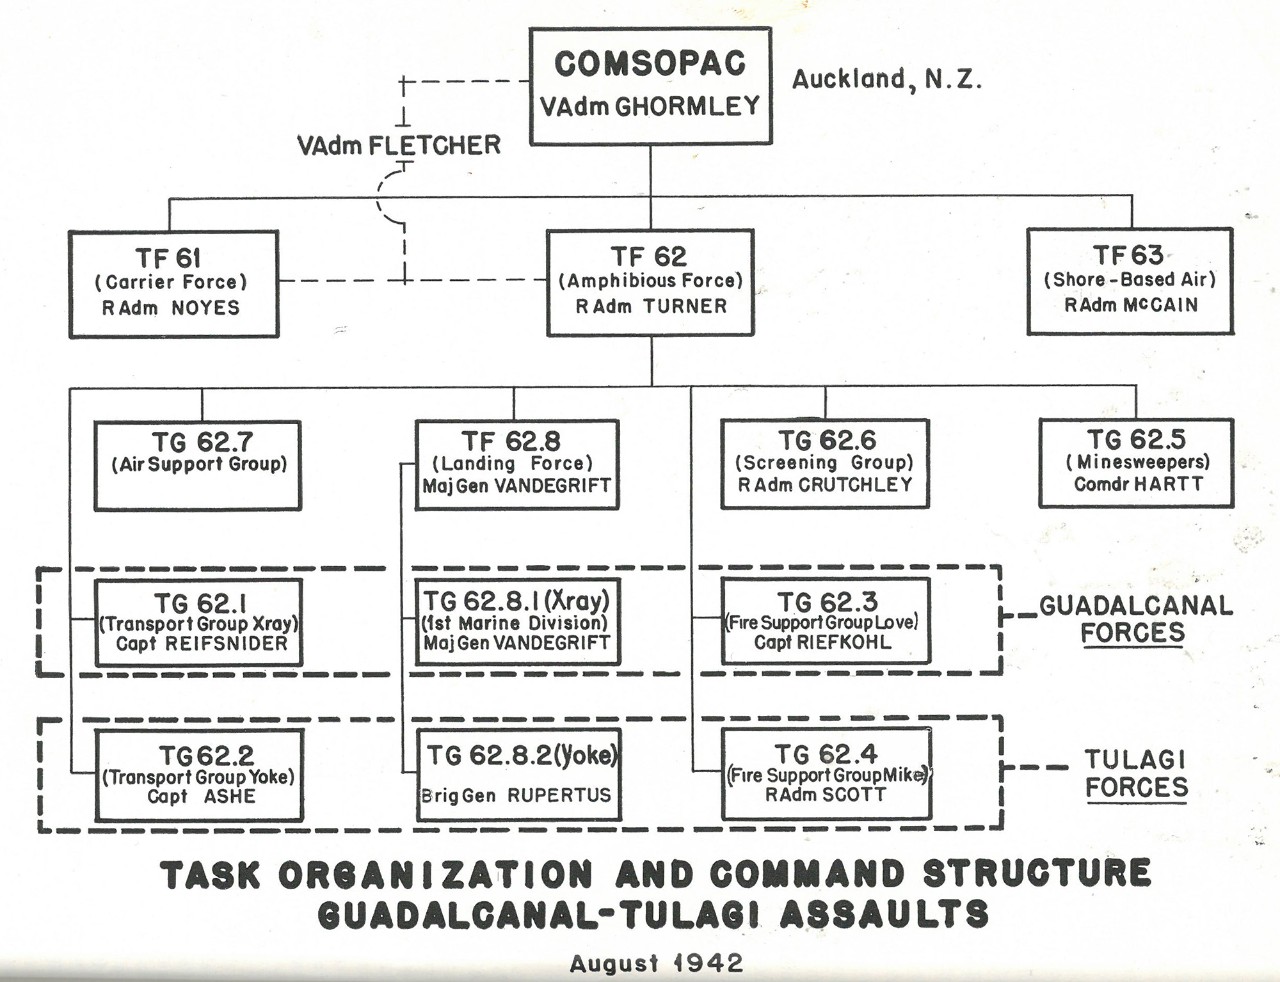 Task Organization and Command Structure, Guadalcanal-Tulagi Assaults, August 1942